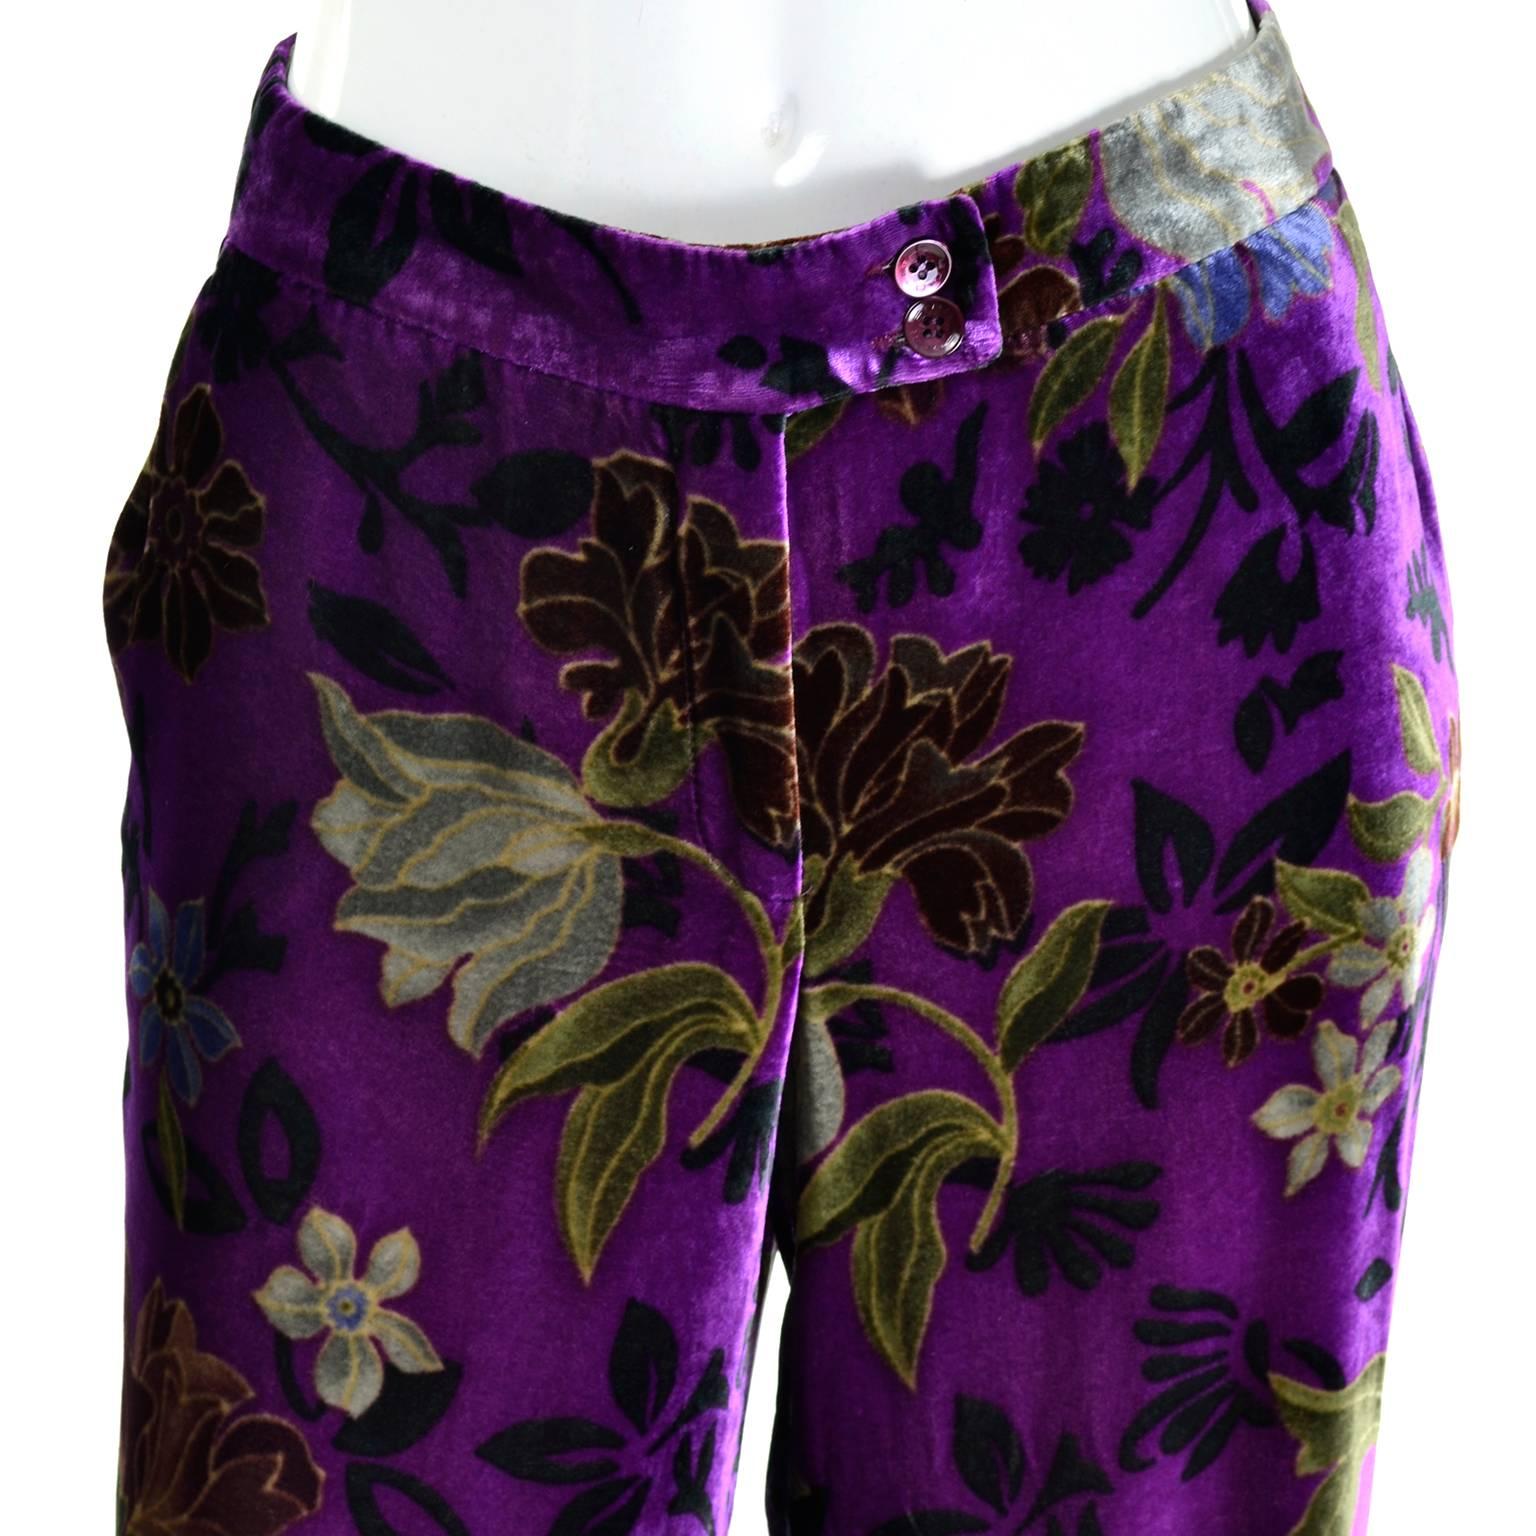 These luxuriously soft purple floral velvet pants from Etro are made of a silk and rayon blend fabric in shades of purple, green and brown.  Perfect for Fall and winter, these wide legged pants have side slit pockets and they close with a front